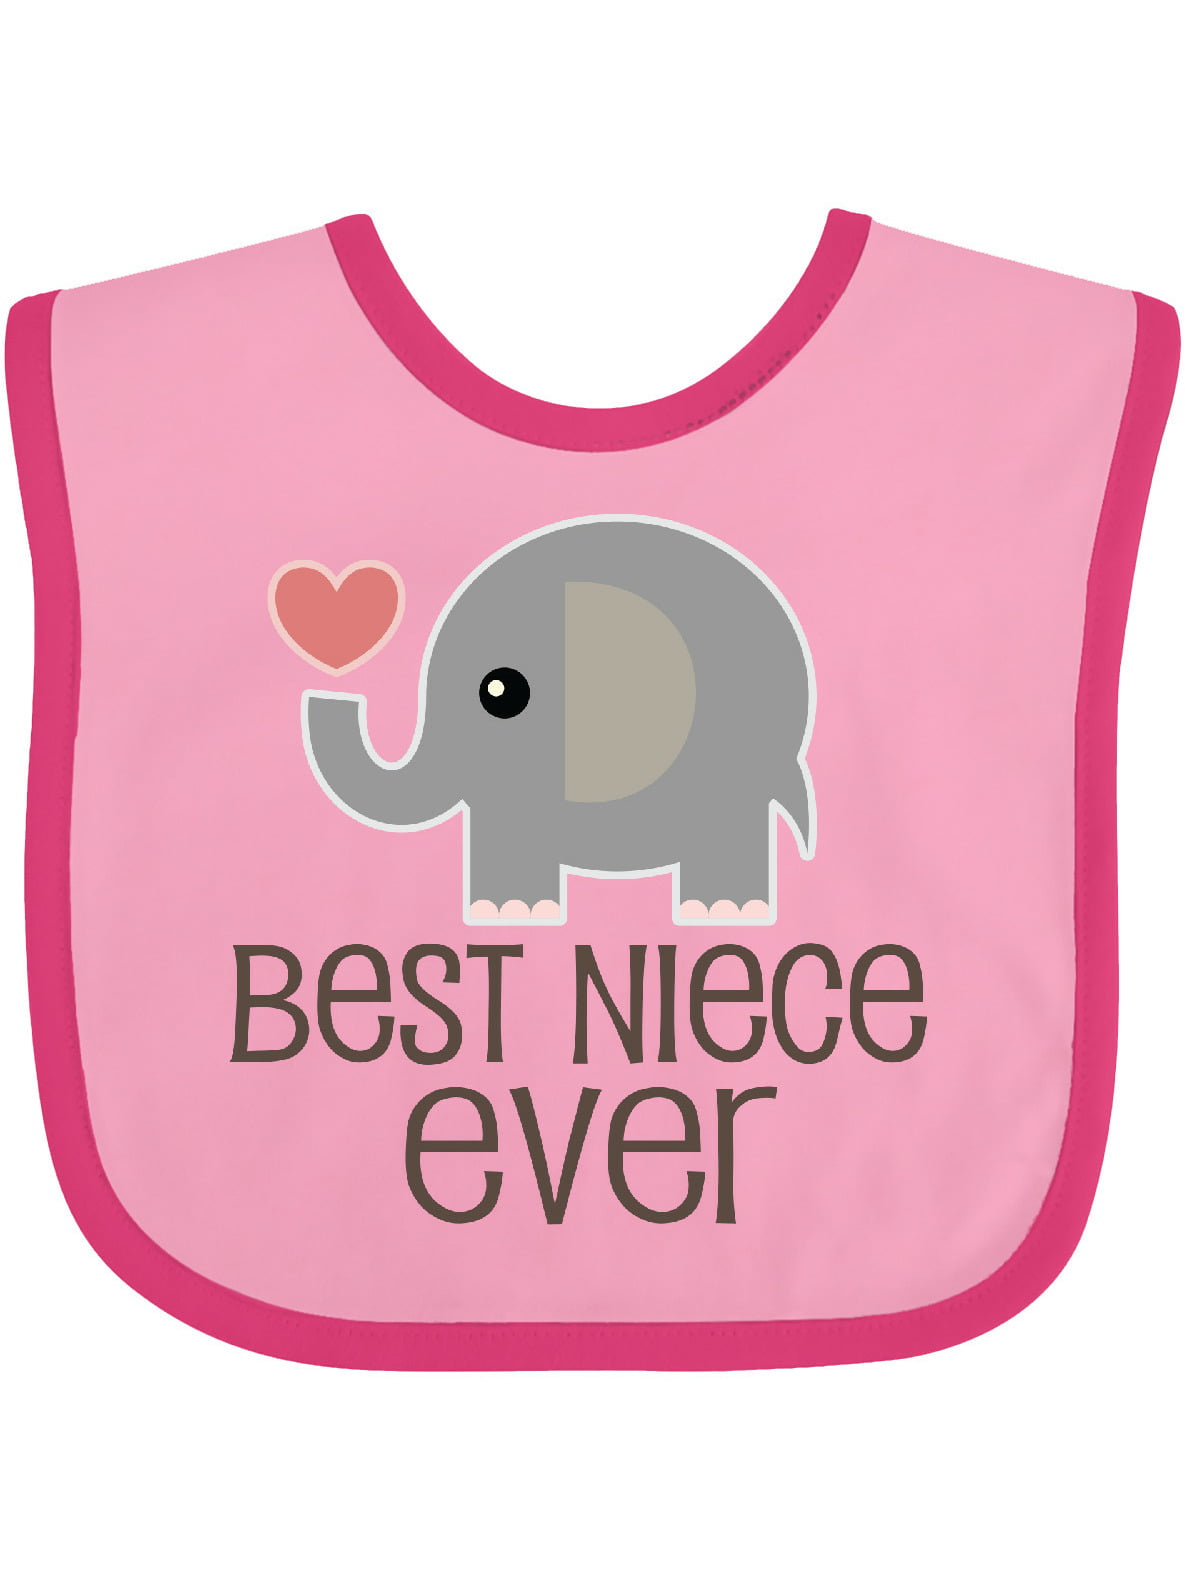 My Auntie Is A Nurse What Super Power Does Yours Have? Baby Bibs Soft Gift 